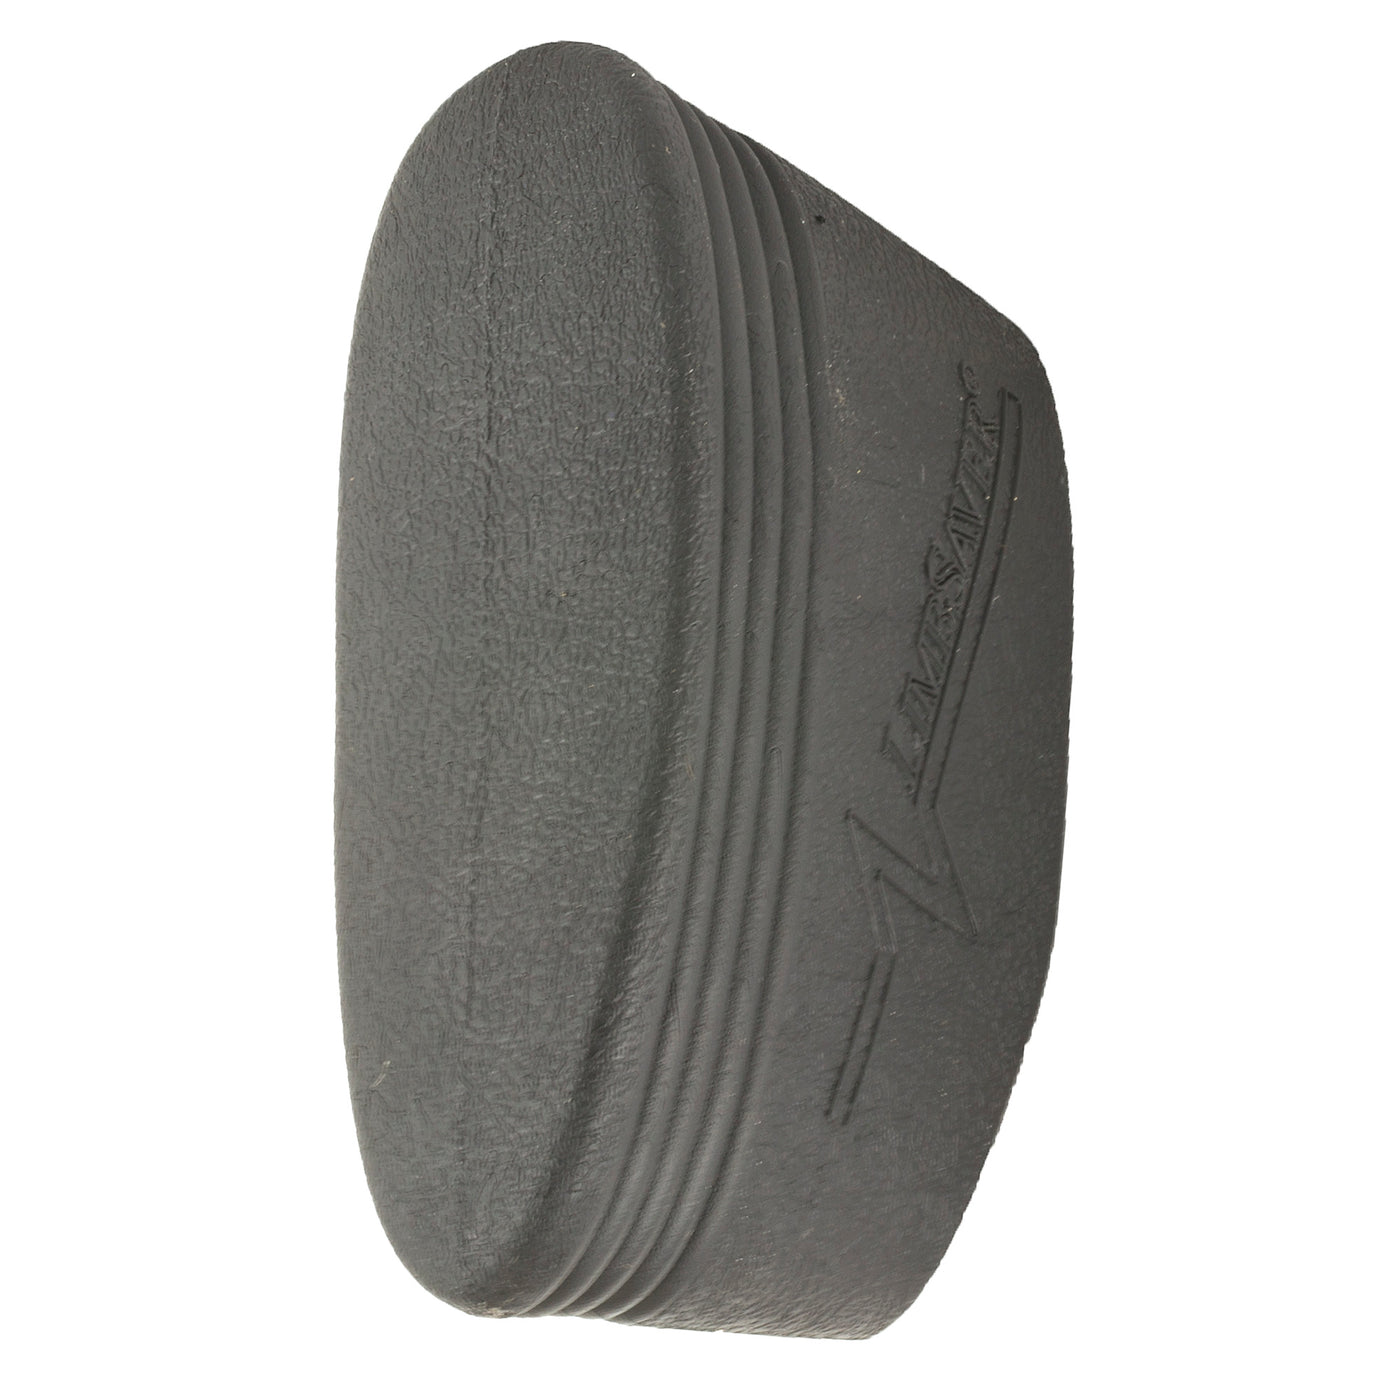 Limbsaver Classic Slip-on Recoil Pad Black Large 1 In.